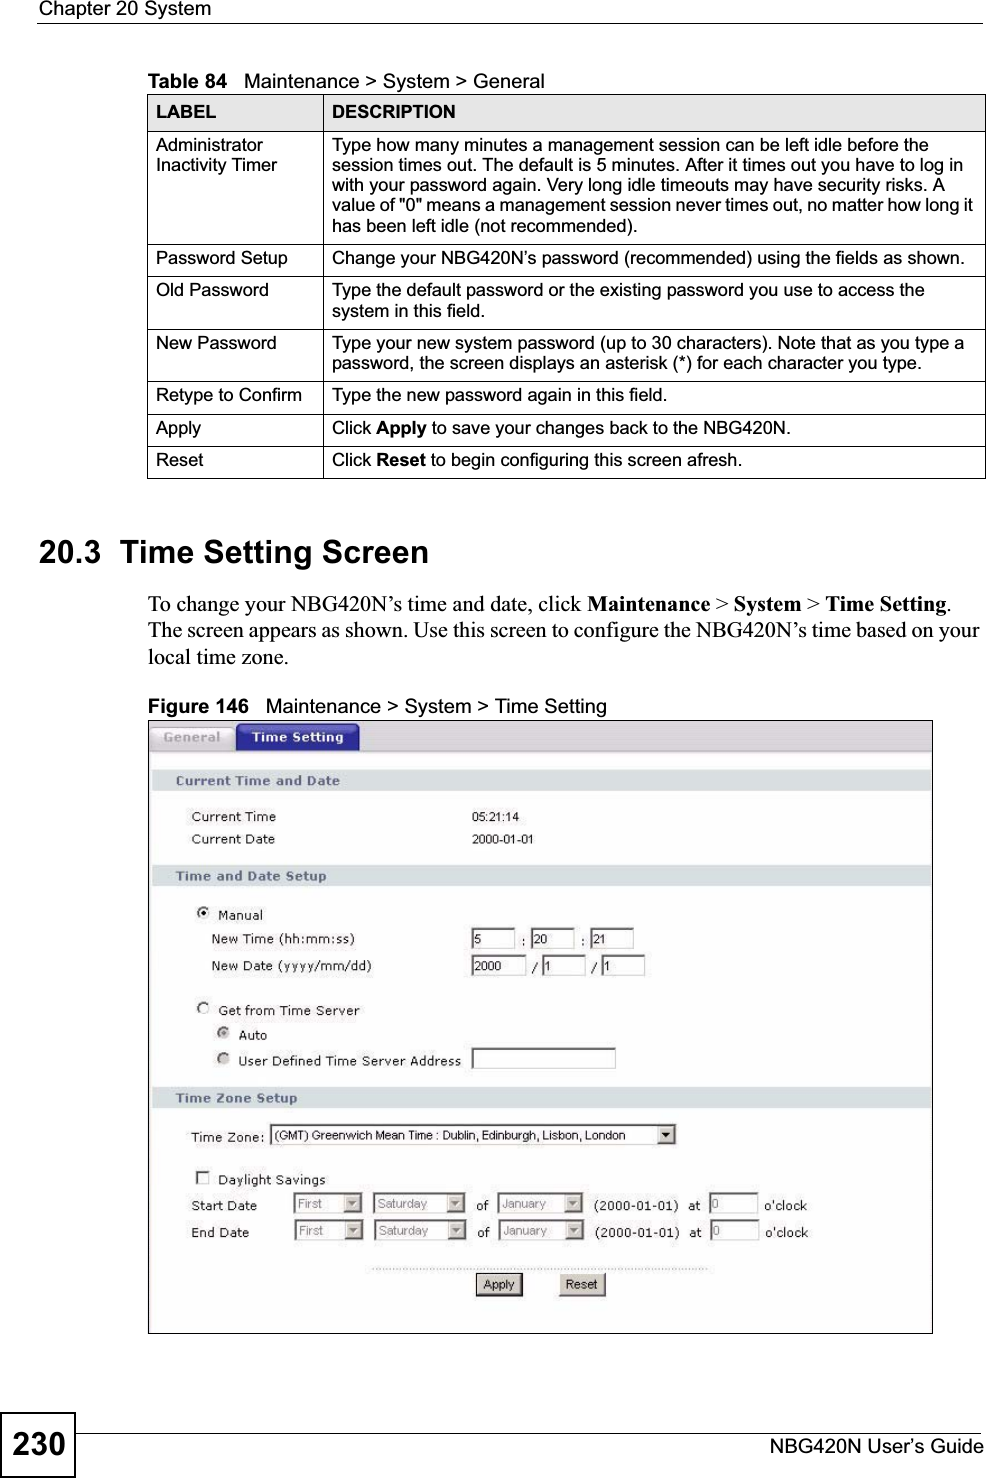 Chapter 20 SystemNBG420N User’s Guide23020.3  Time Setting ScreenTo change your NBG420N’s time and date, click Maintenance &gt; System &gt; Time Setting.The screen appears as shown. Use this screen to configure the NBG420N’s time based on your local time zone.Figure 146   Maintenance &gt; System &gt; Time Setting Administrator Inactivity TimerType how many minutes a management session can be left idle before the session times out. The default is 5 minutes. After it times out you have to log in with your password again. Very long idle timeouts may have security risks. A value of &quot;0&quot; means a management session never times out, no matter how long it has been left idle (not recommended).Password Setup Change your NBG420N’s password (recommended) using the fields as shown.Old Password Type the default password or the existing password you use to access the system in this field.New Password Type your new system password (up to 30 characters). Note that as you type a password, the screen displays an asterisk (*) for each character you type.Retype to Confirm Type the new password again in this field.Apply Click Apply to save your changes back to the NBG420N.Reset Click Reset to begin configuring this screen afresh.Table 84   Maintenance &gt; System &gt; GeneralLABEL DESCRIPTION